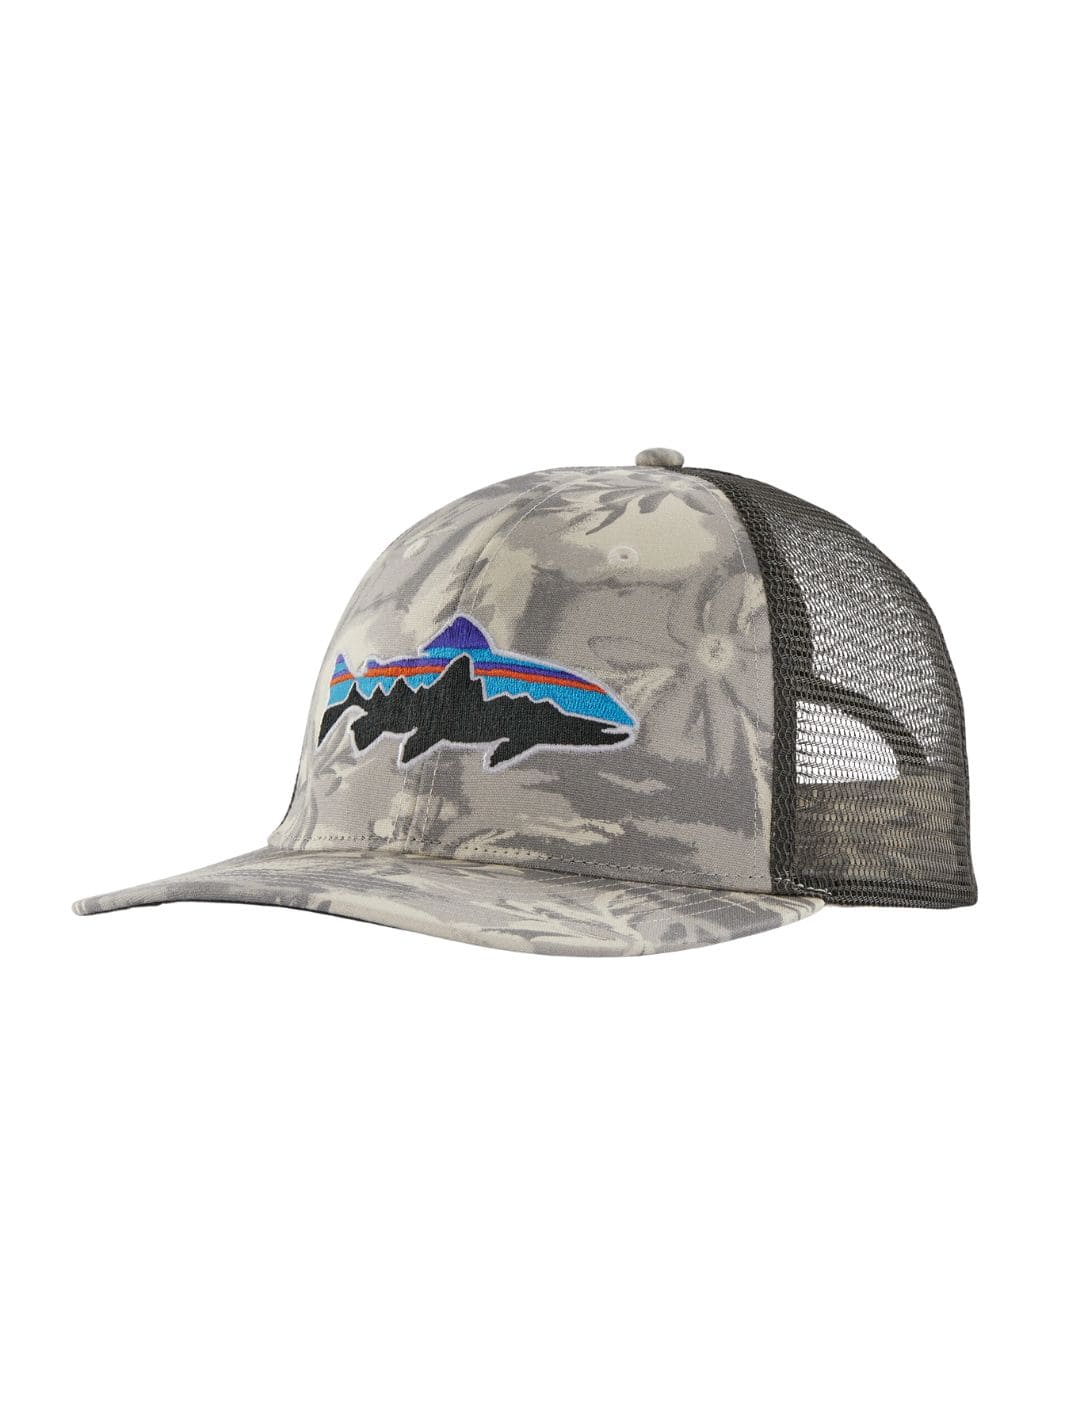 Patagonia Accessories Cap | Fitz Roy Trout Trucker Hat Natural